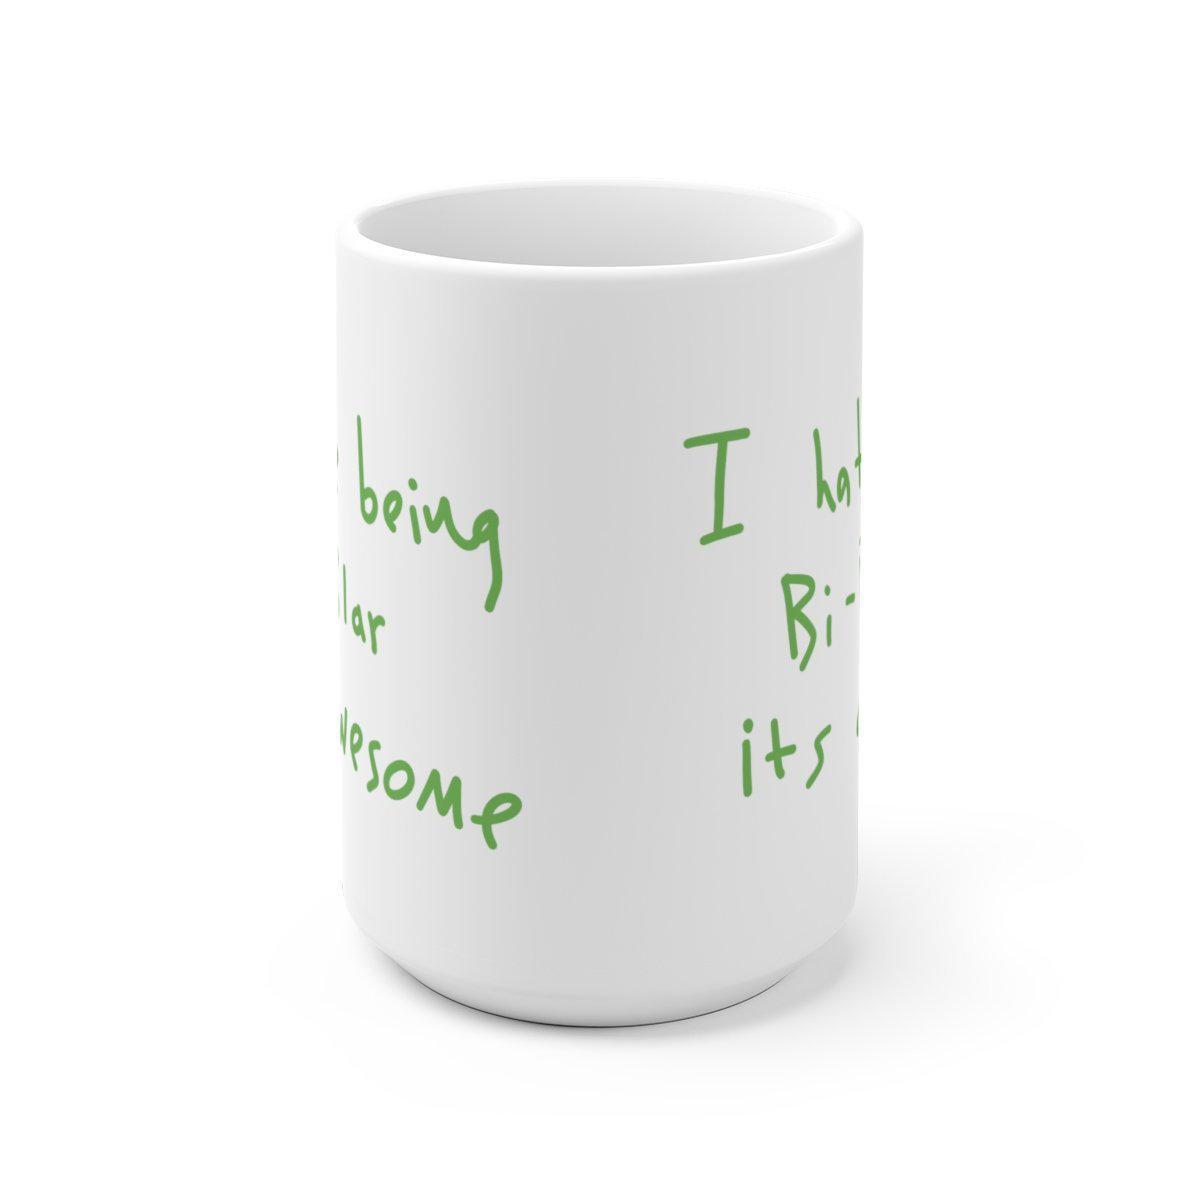 I hate being Bi-Polar it's awesome Mug - Inspired by Kanye West Album cover-Archethype